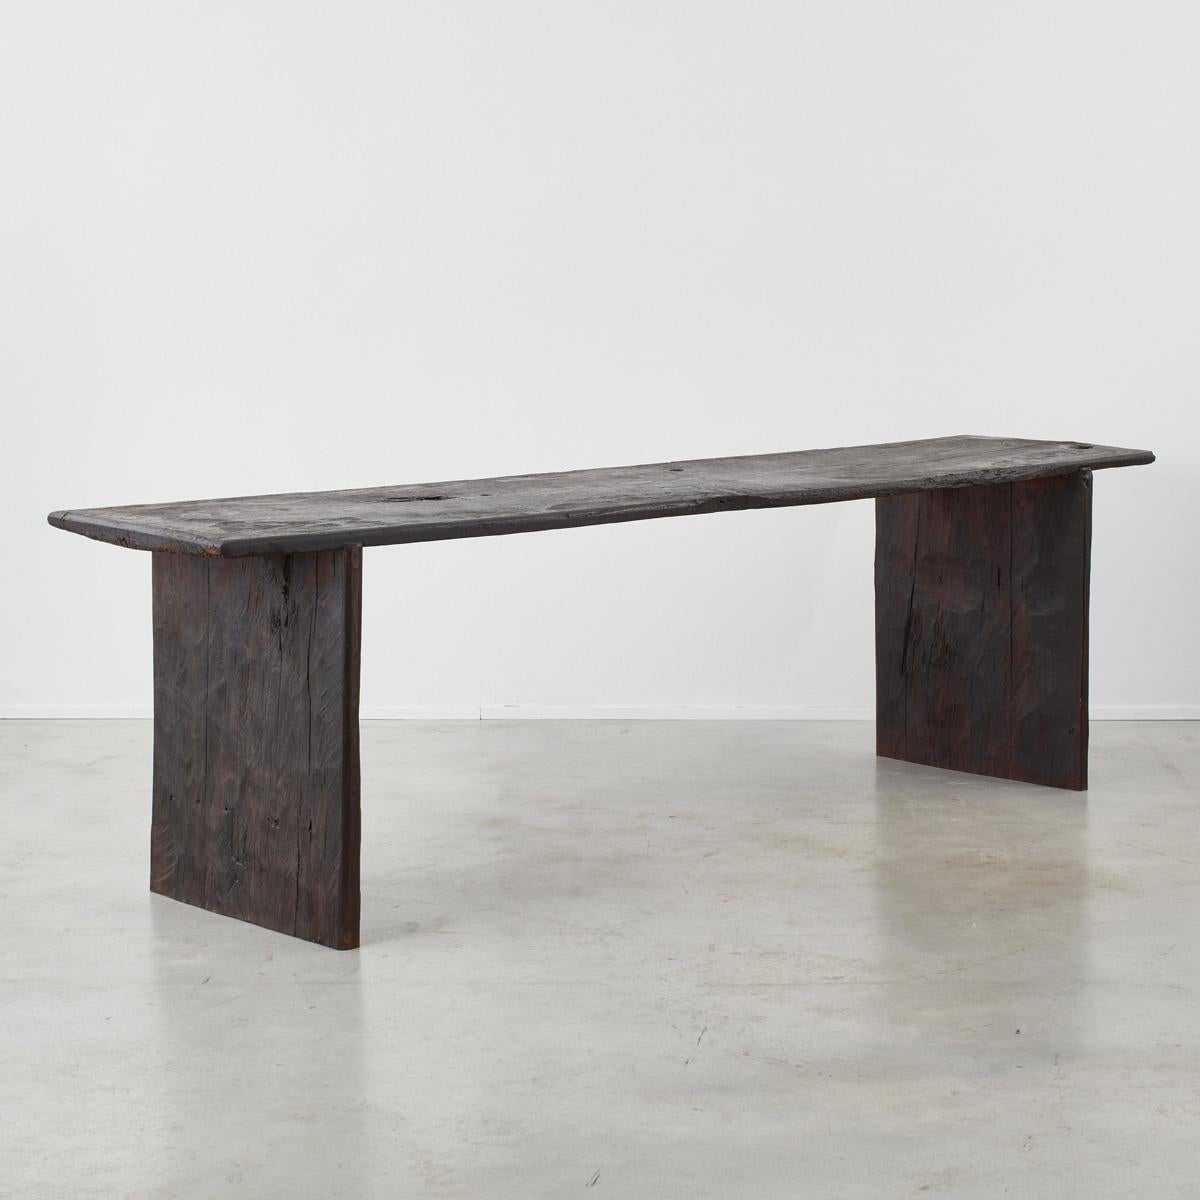 This large console table is comprised of rare 18th century Spanish boards which were assembled in London in 2021. The construction is rudimentary but incredibly solid, and it expresses a strangely contemporary form.

The table is finished with a